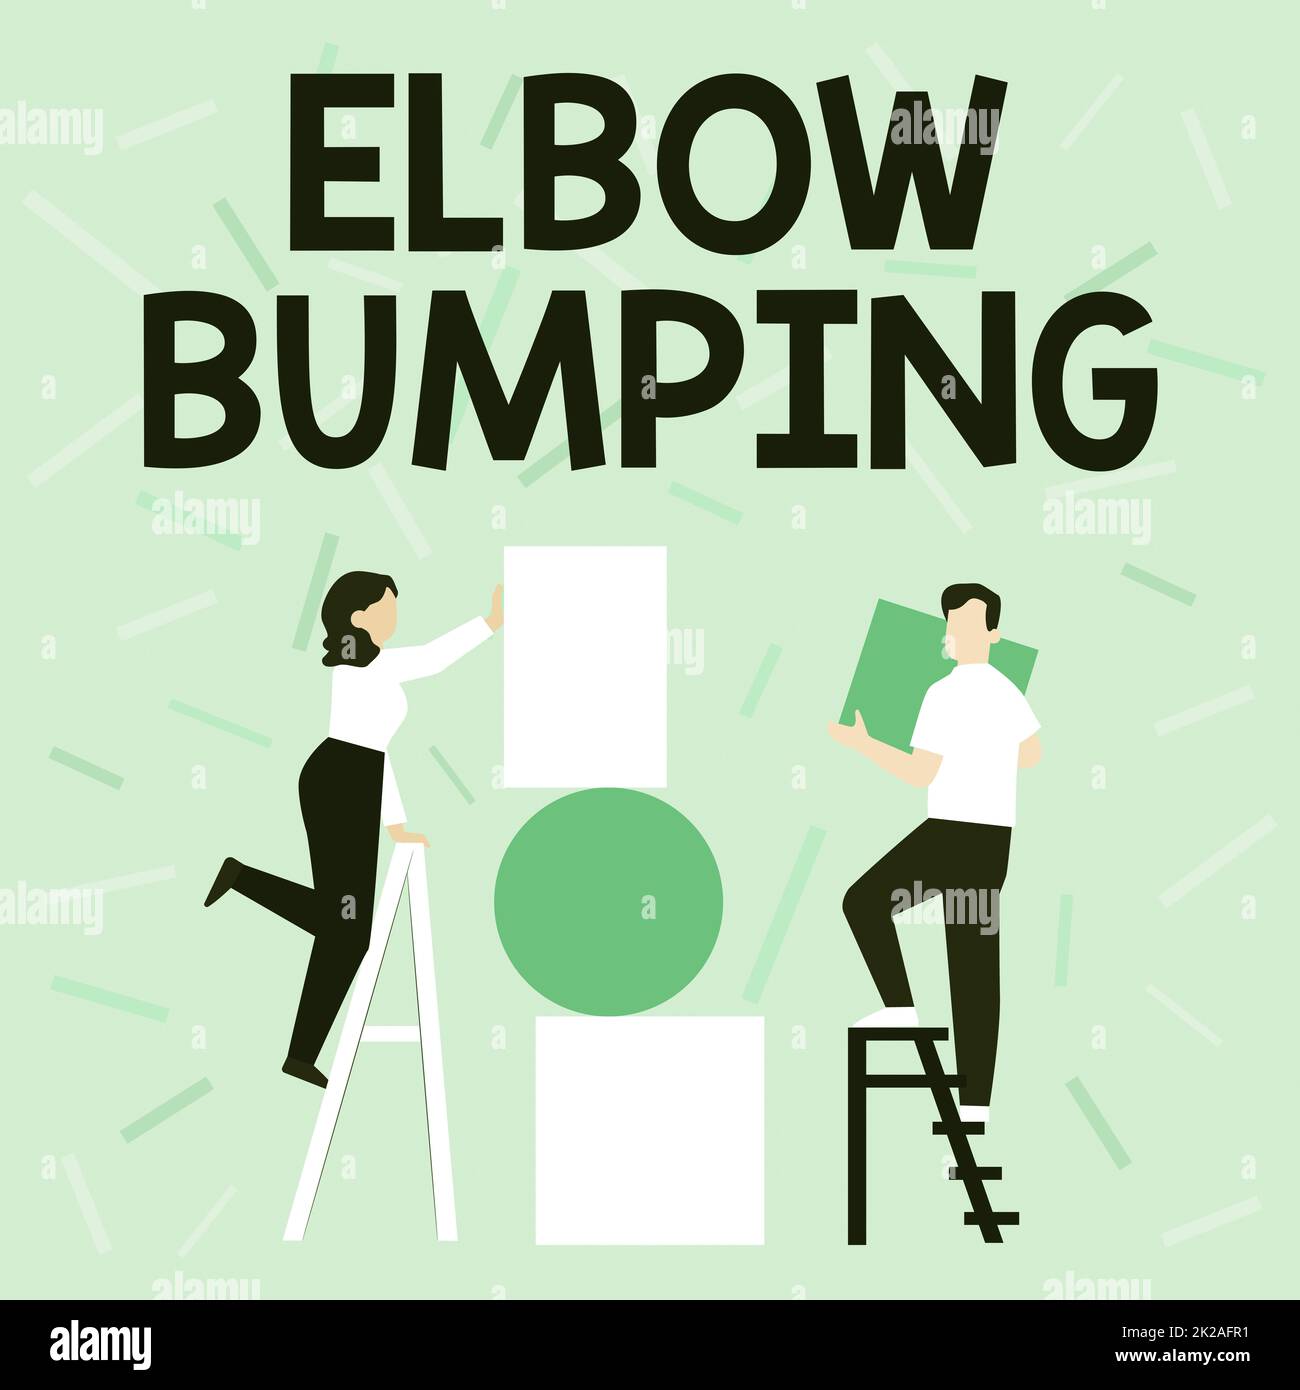 Sign displaying Elbow Bumping. Internet Concept newlytrended handshake where two individual touch elbows Couple Drawing Using Ladder Placing Big Empty Picture Frames To A Wall. Stock Photo